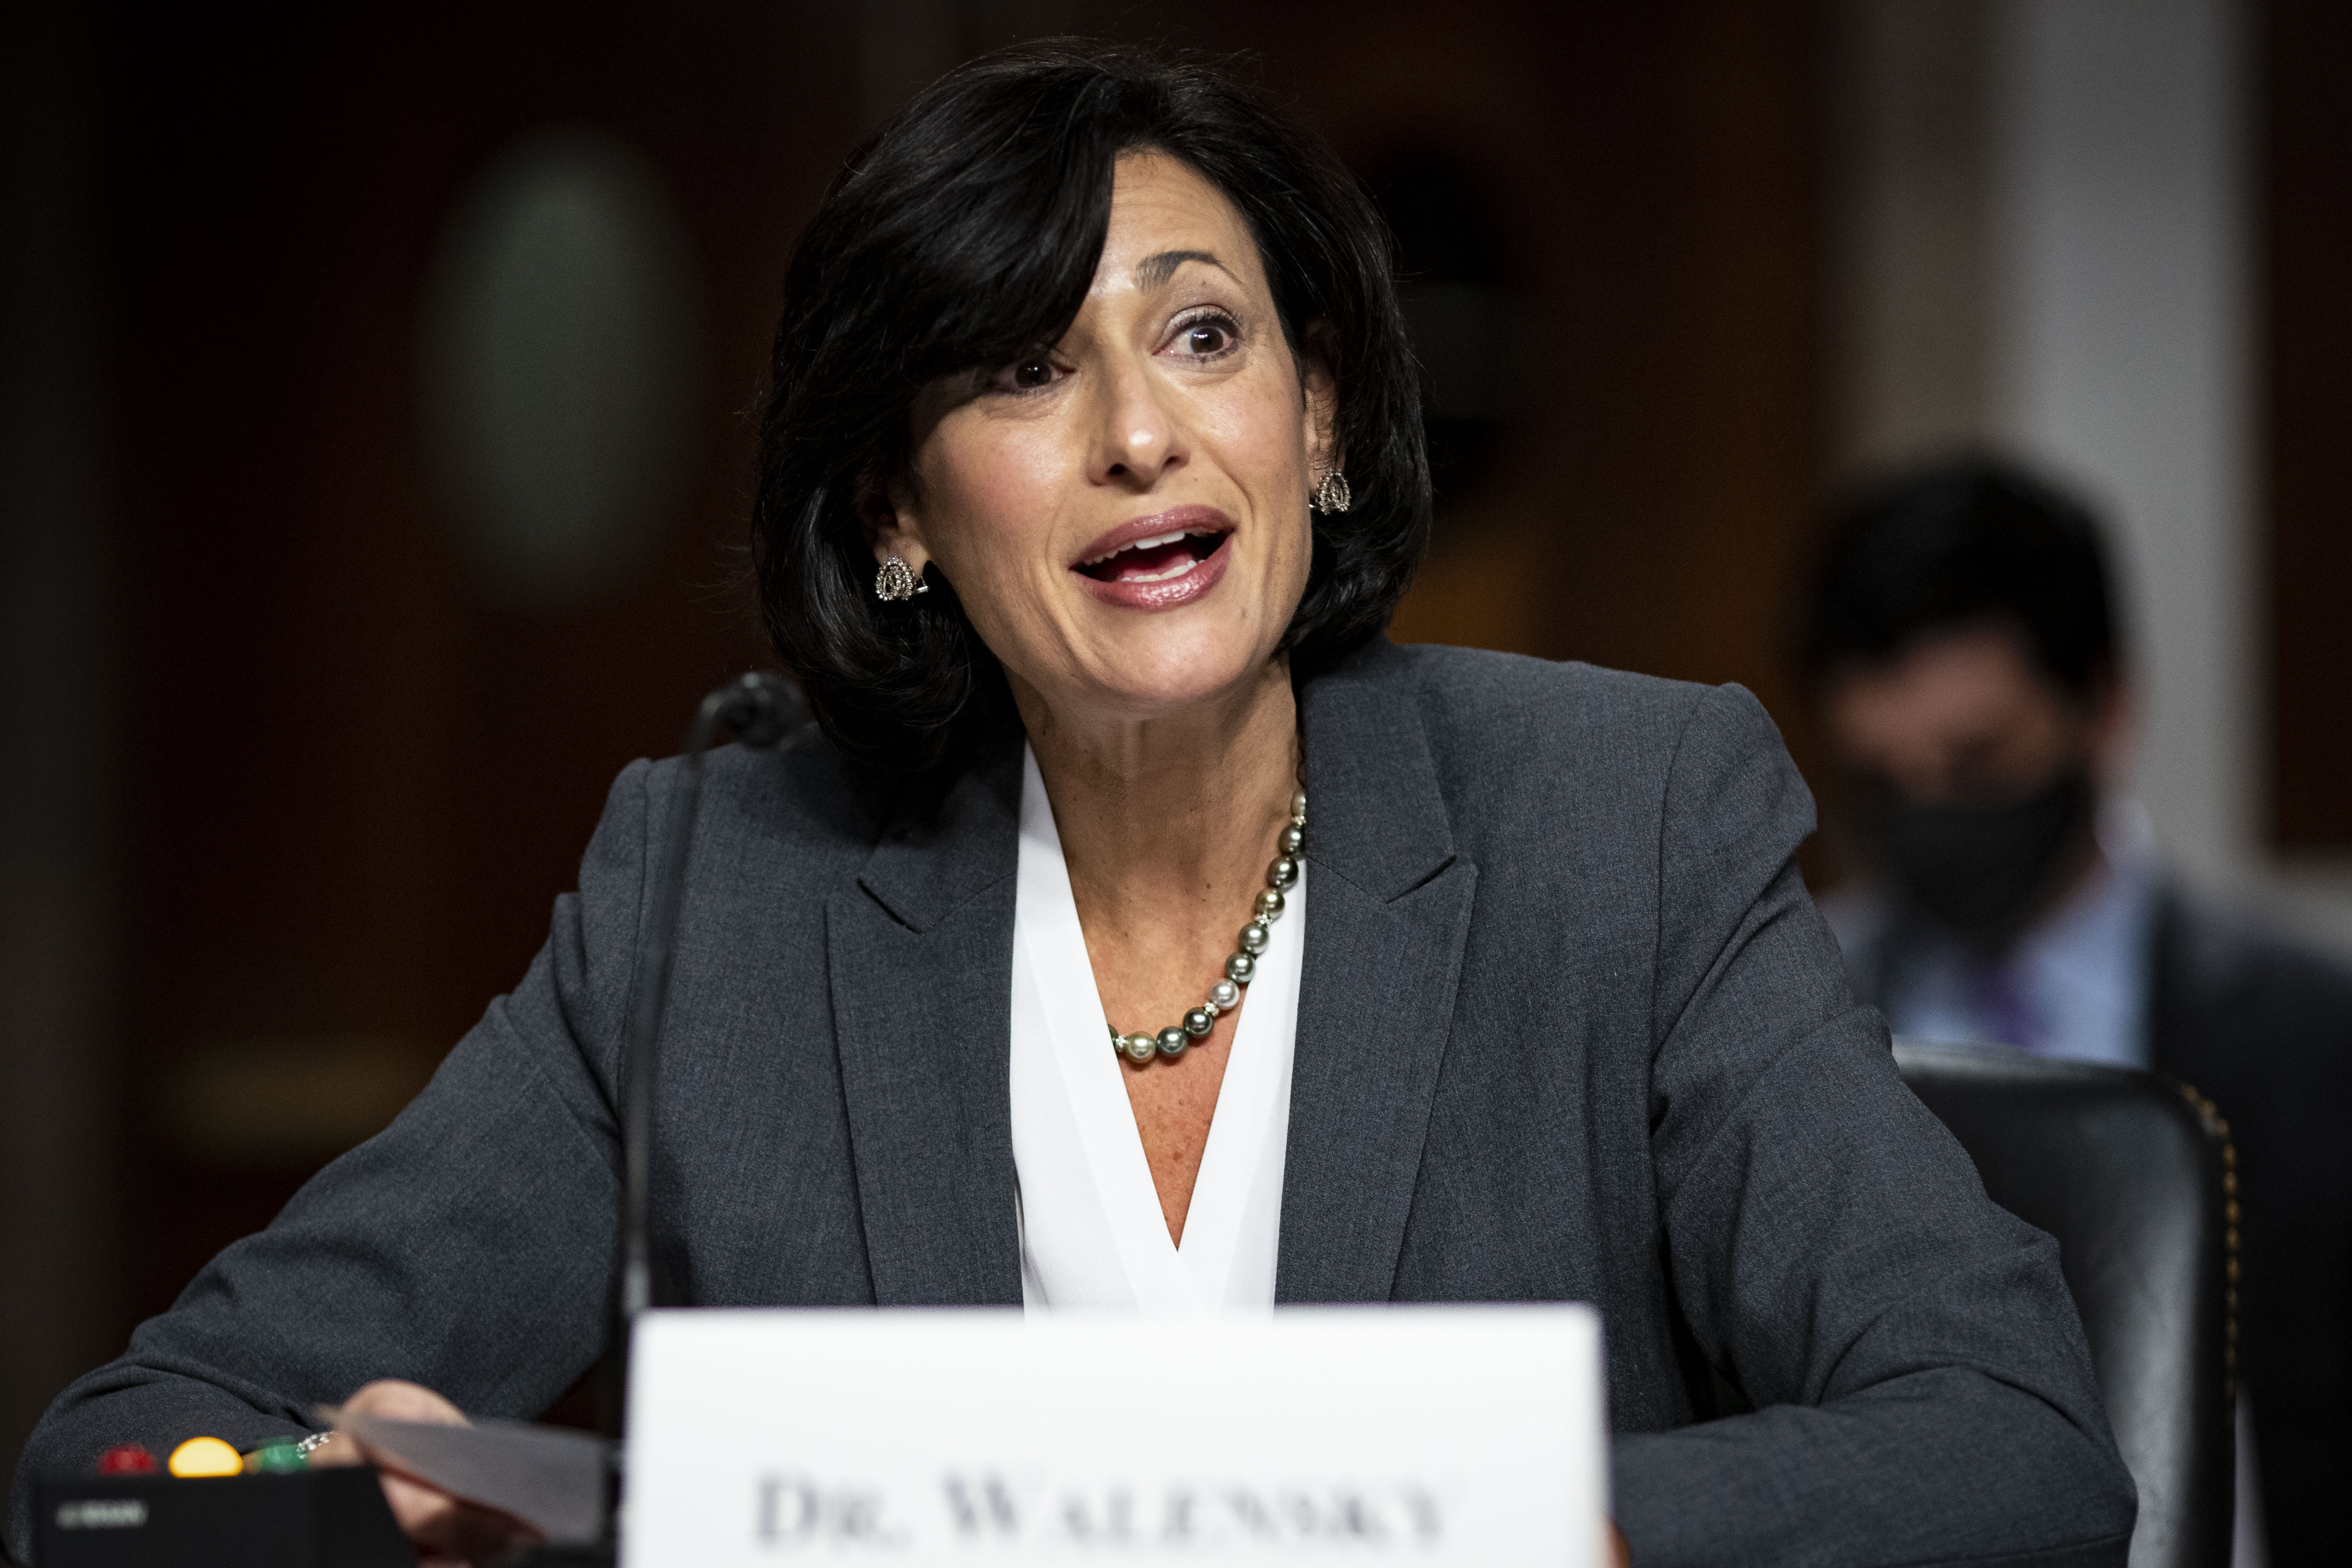 Rochelle Walensky, director of the U.S. Centers for Disease Control and Prevention (CDC), speaks during a Senate Health, Education, Labor, and Pensions Committee hearing in Washington, D.C., U.S., on Thursday, November 4, 2021. 